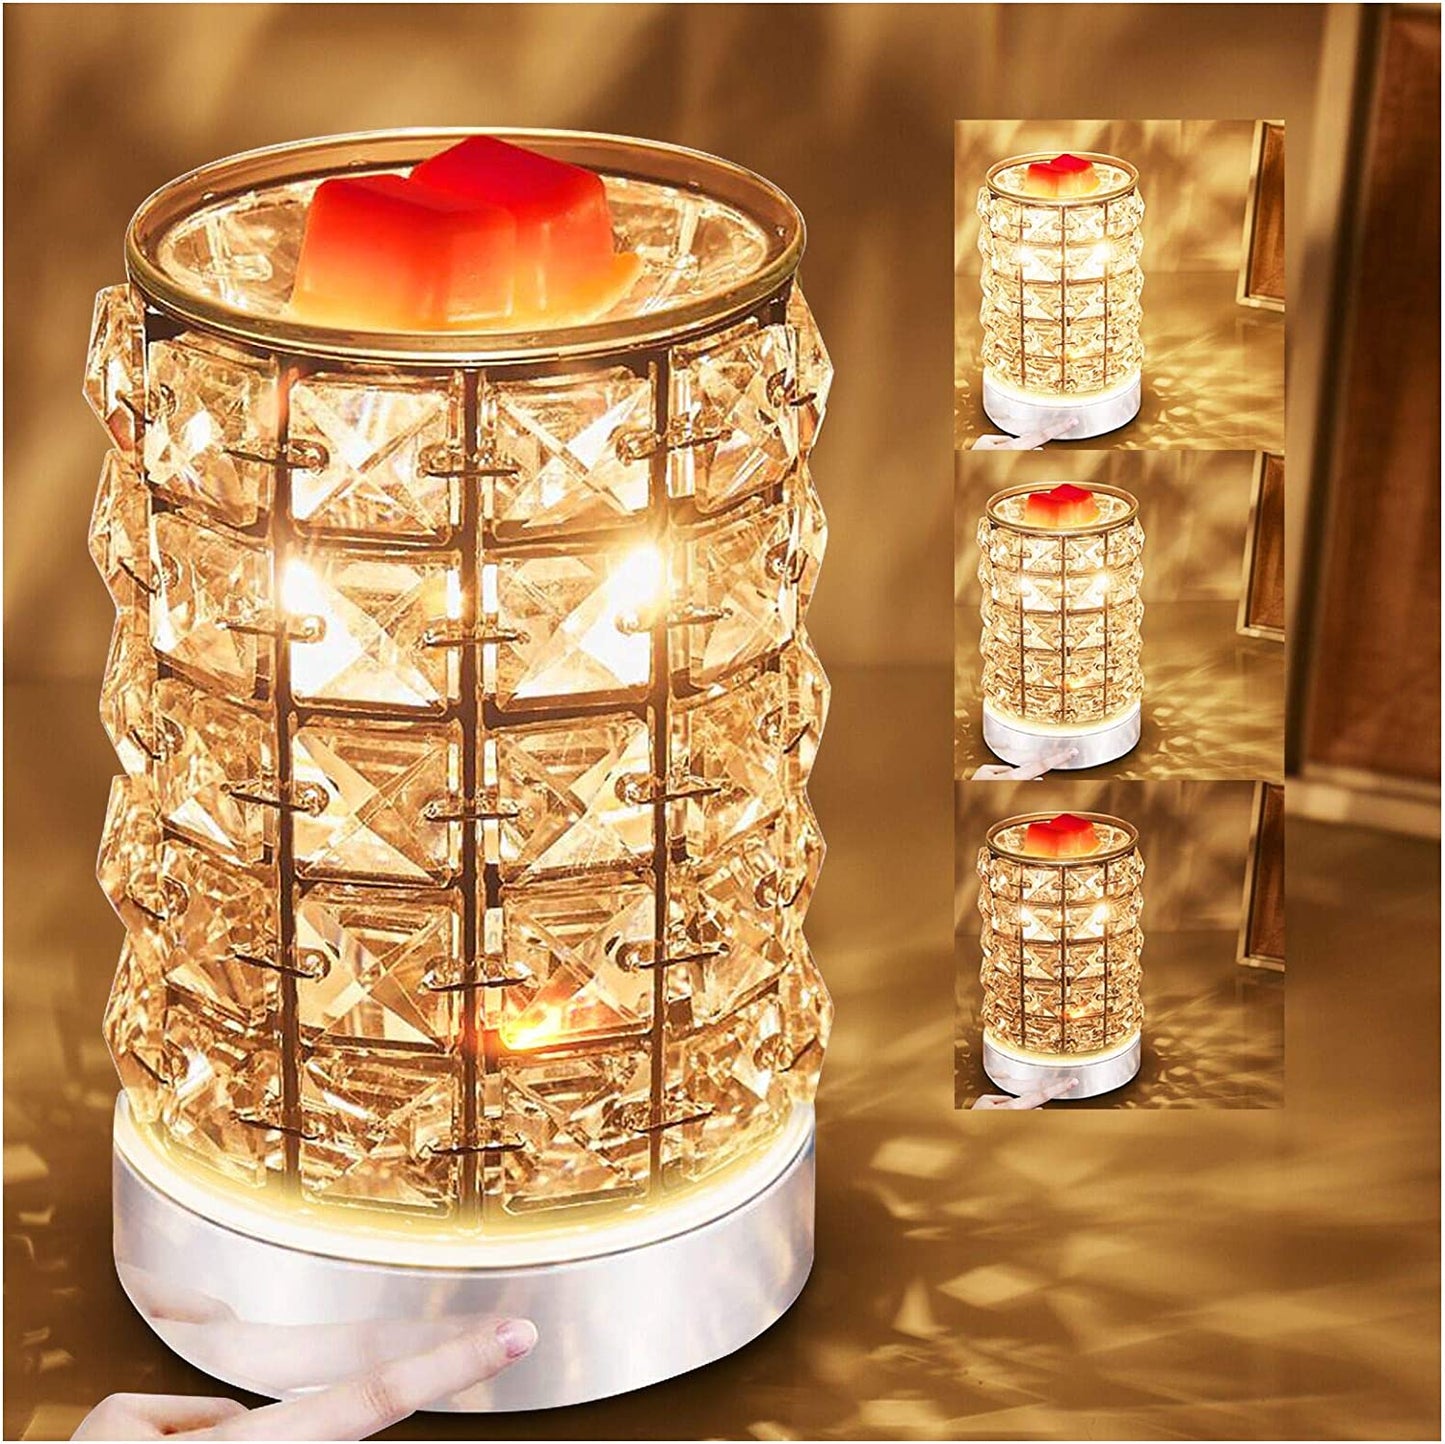 Crystal Touch Electric Wax Melt Warmer with Dimmable Fragrance Candle Melter Warmer for Warming Scented Candle Oil Burner- Spa,Aromatherapy (Transparent Crystal)